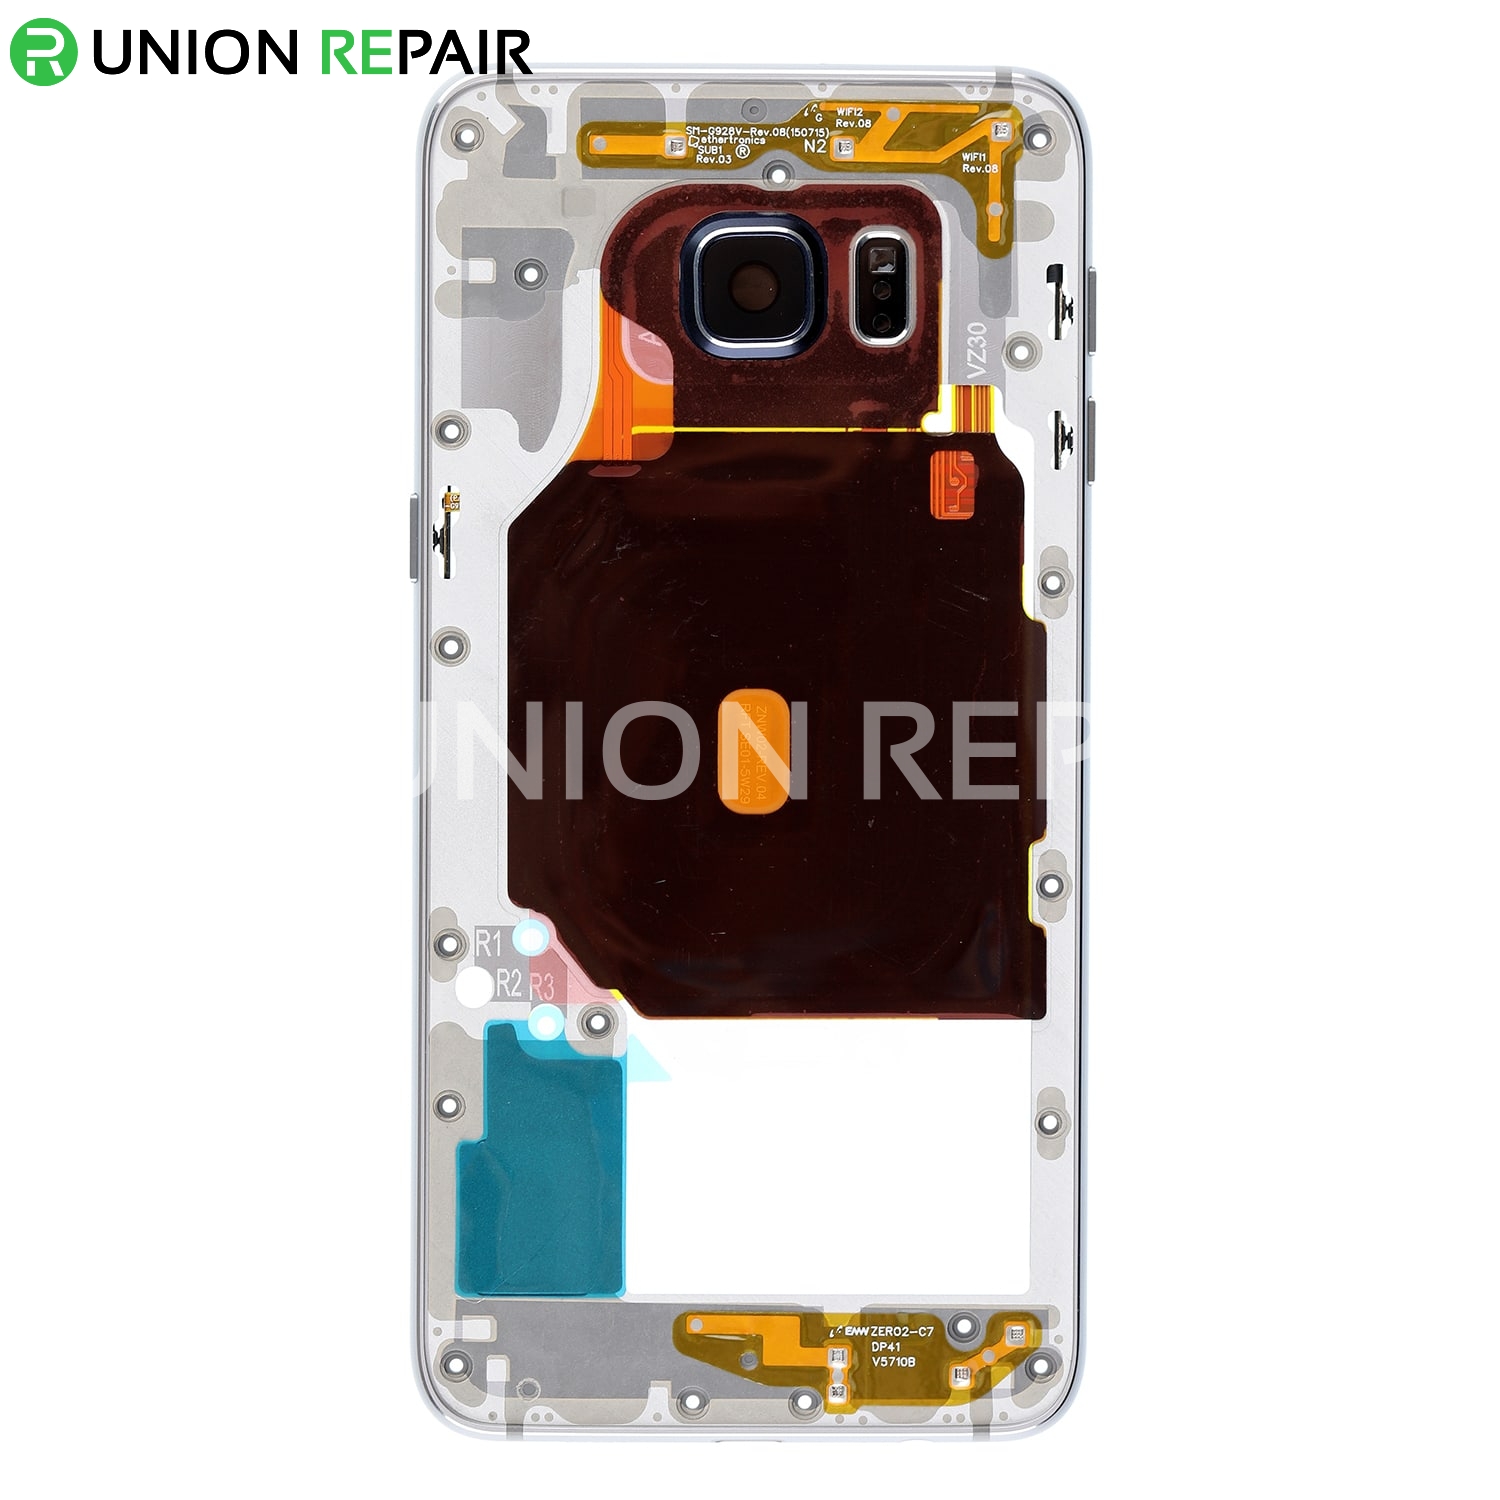 Replacement for Samsung Galaxy S6 Edge Plus SM-G928F Rear Housing Assembly - Gray